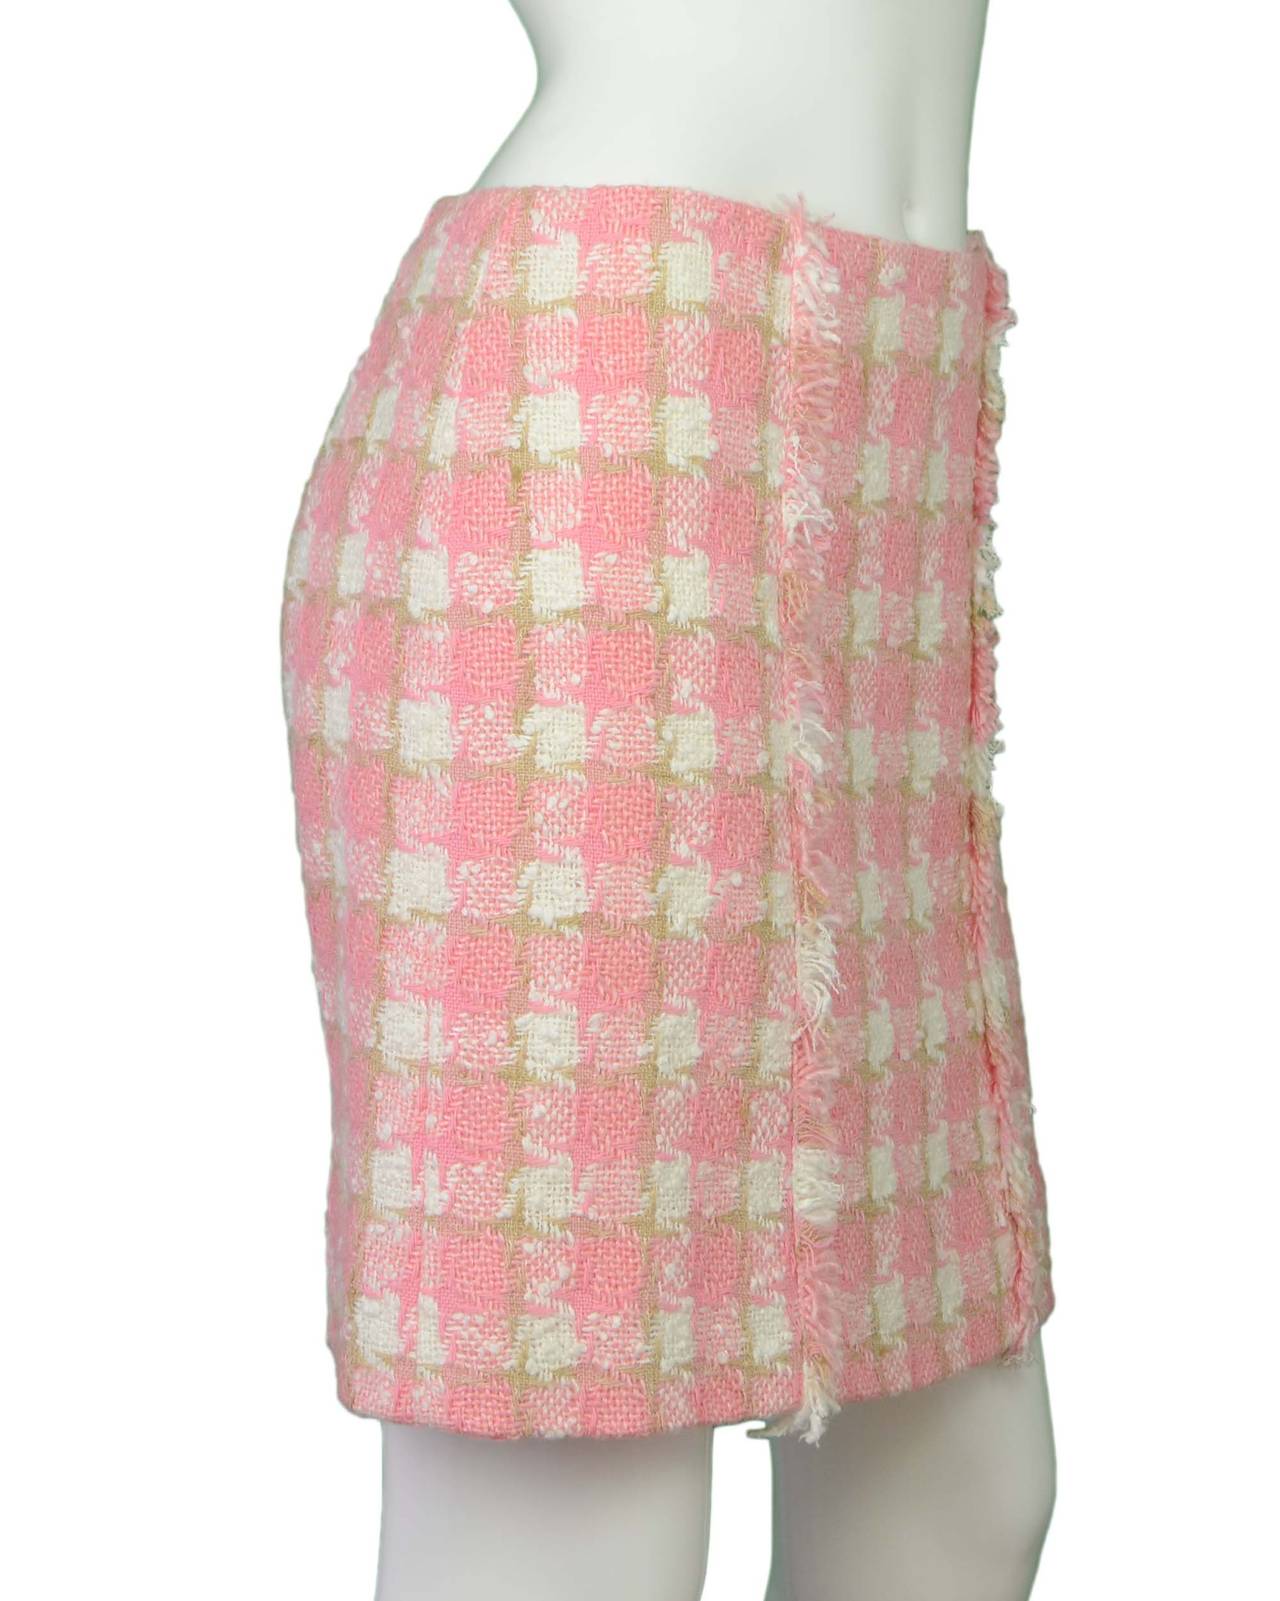 Chanel Pink & White Houndstooth Tweed Skirt
Features two vertical panels of fringe on front side of skirt
Made in: France
Year of Production: 2004
Color: Pink, white and tan
Composition: 55% rayon, 26% cotton, 19% wool
Lining: White, 100%